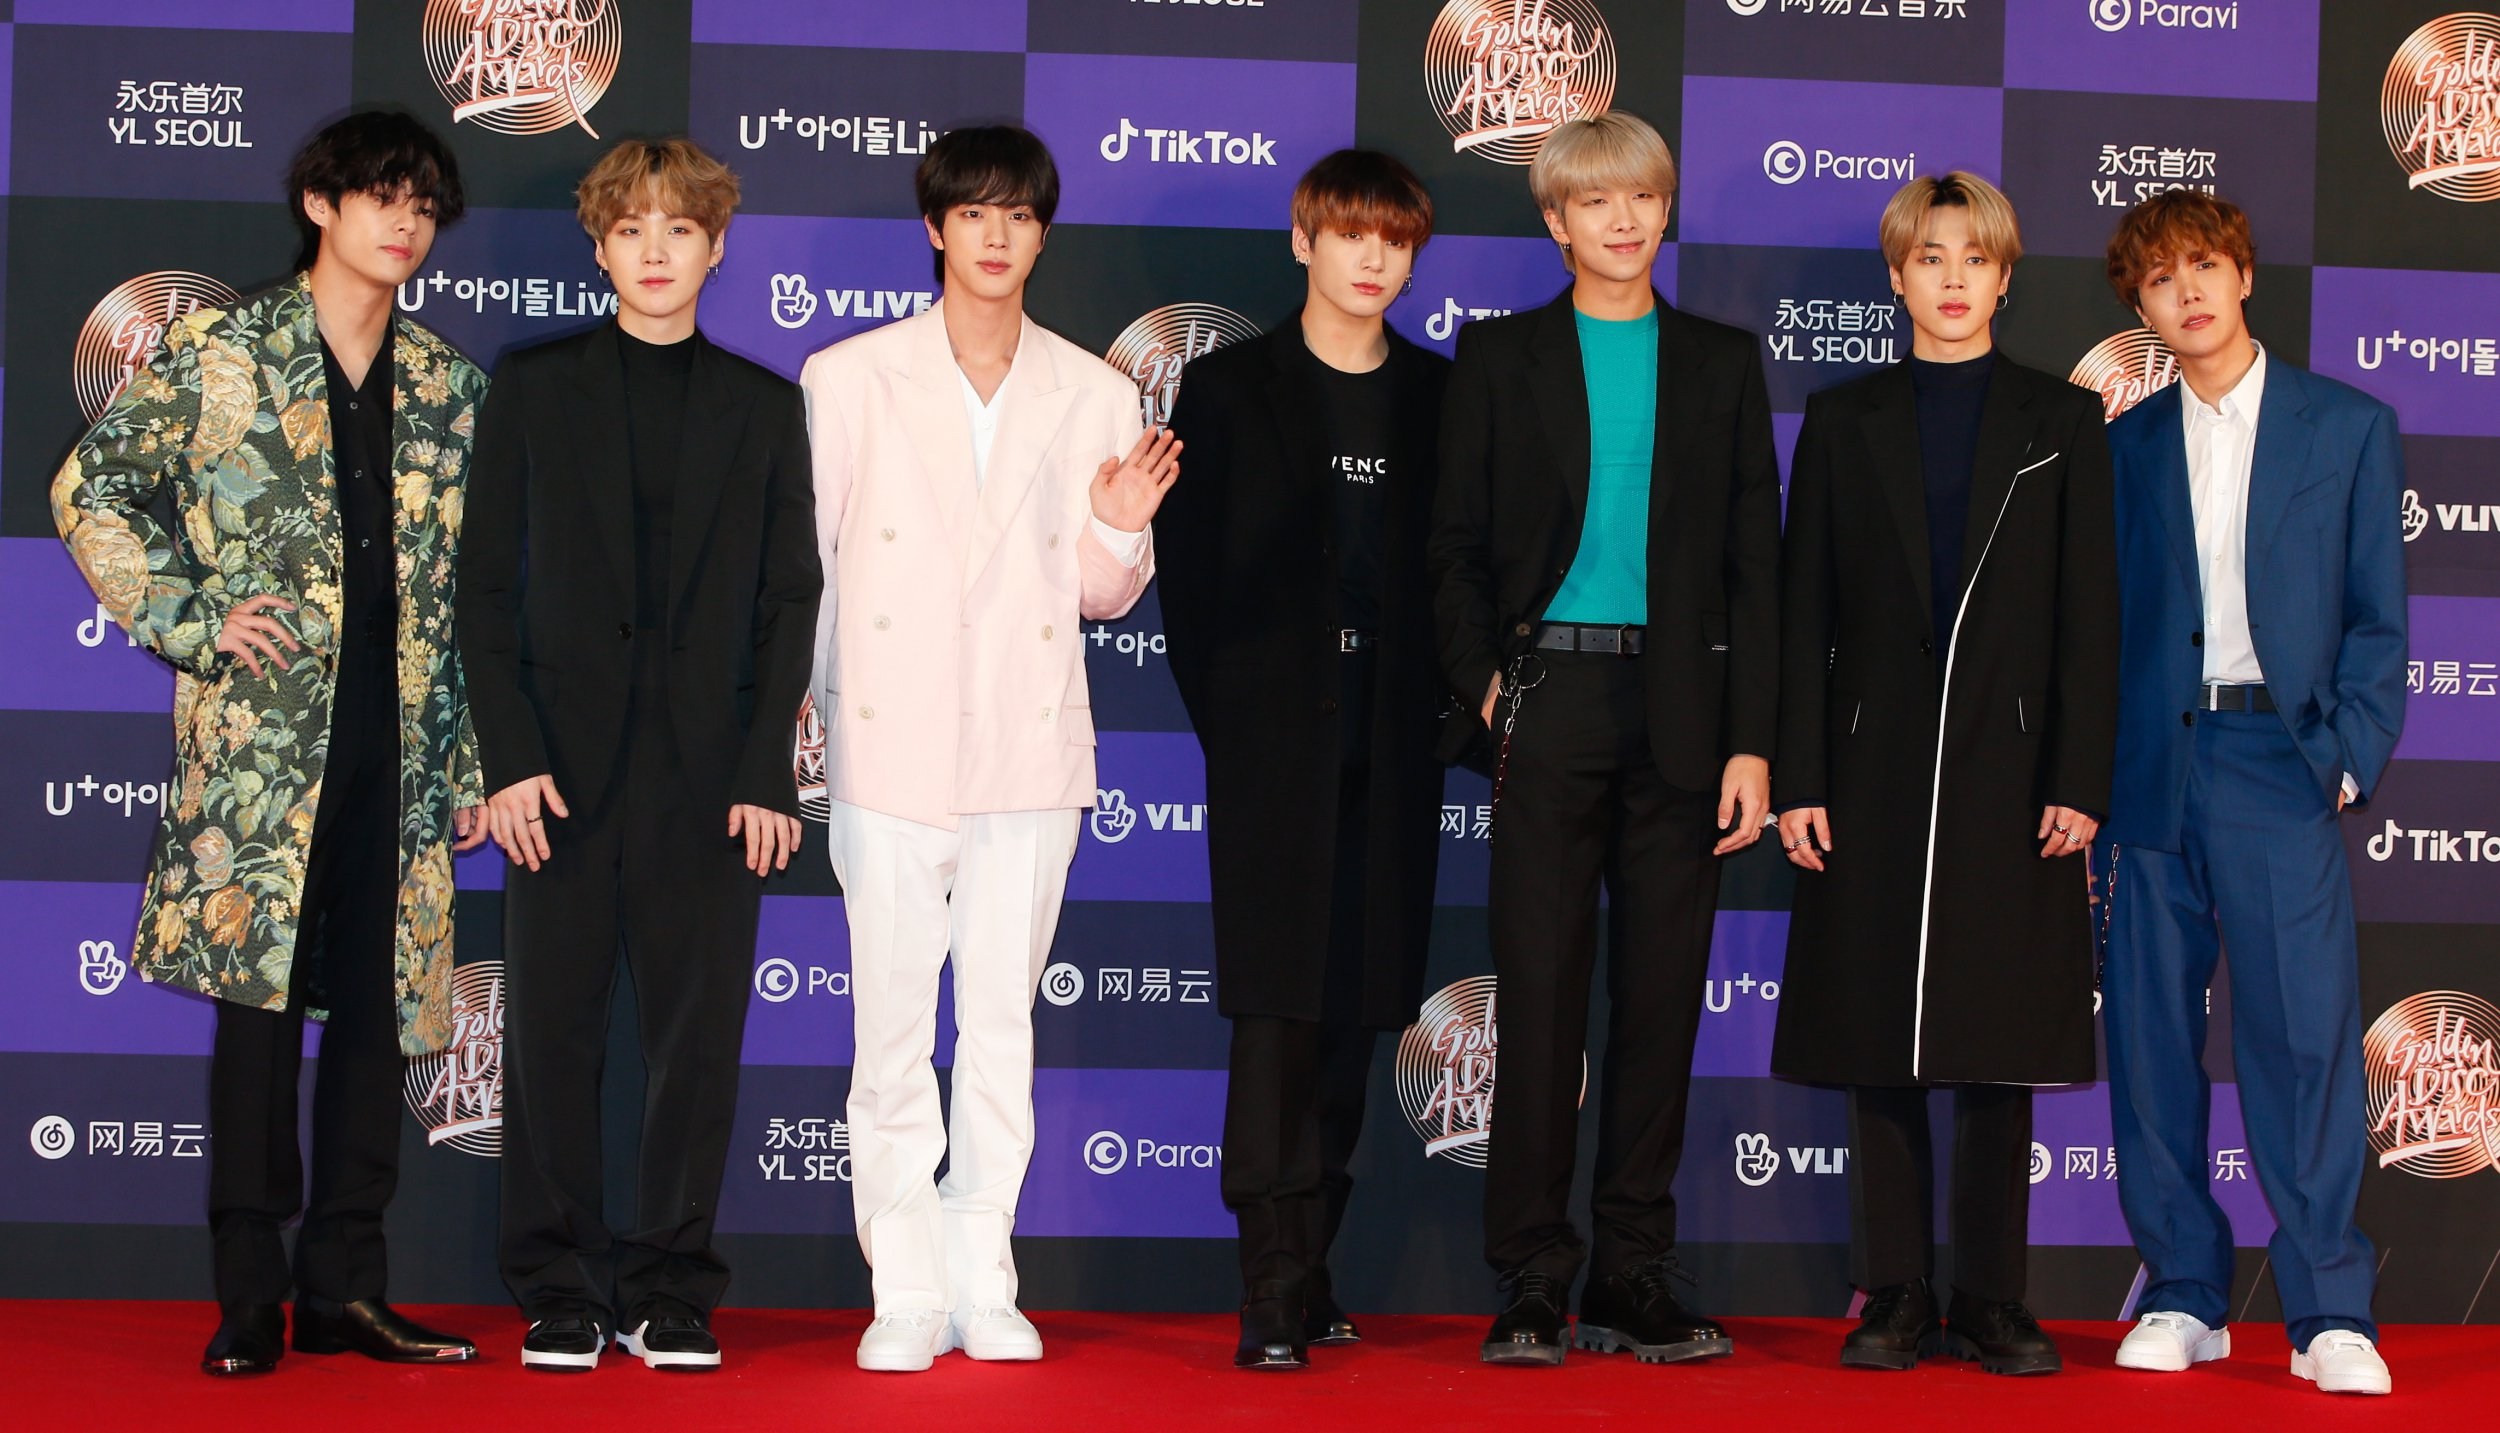 epa08103915 Members of South Korean boy band 'Bangtan Boys, BTS' pose as they arrive for the 34st annual Golden Disk Awards ceremony at the Gocheok Sky Dome in Seoul, South Korea, 05 January 2020. The Golden Disc Awards is recognized as the most traditional music awards ceremony in South Korea, with an award ceremony to select the best albums, singers and producers in the Korean pop scene. EPA/KIM HEE-CHUL